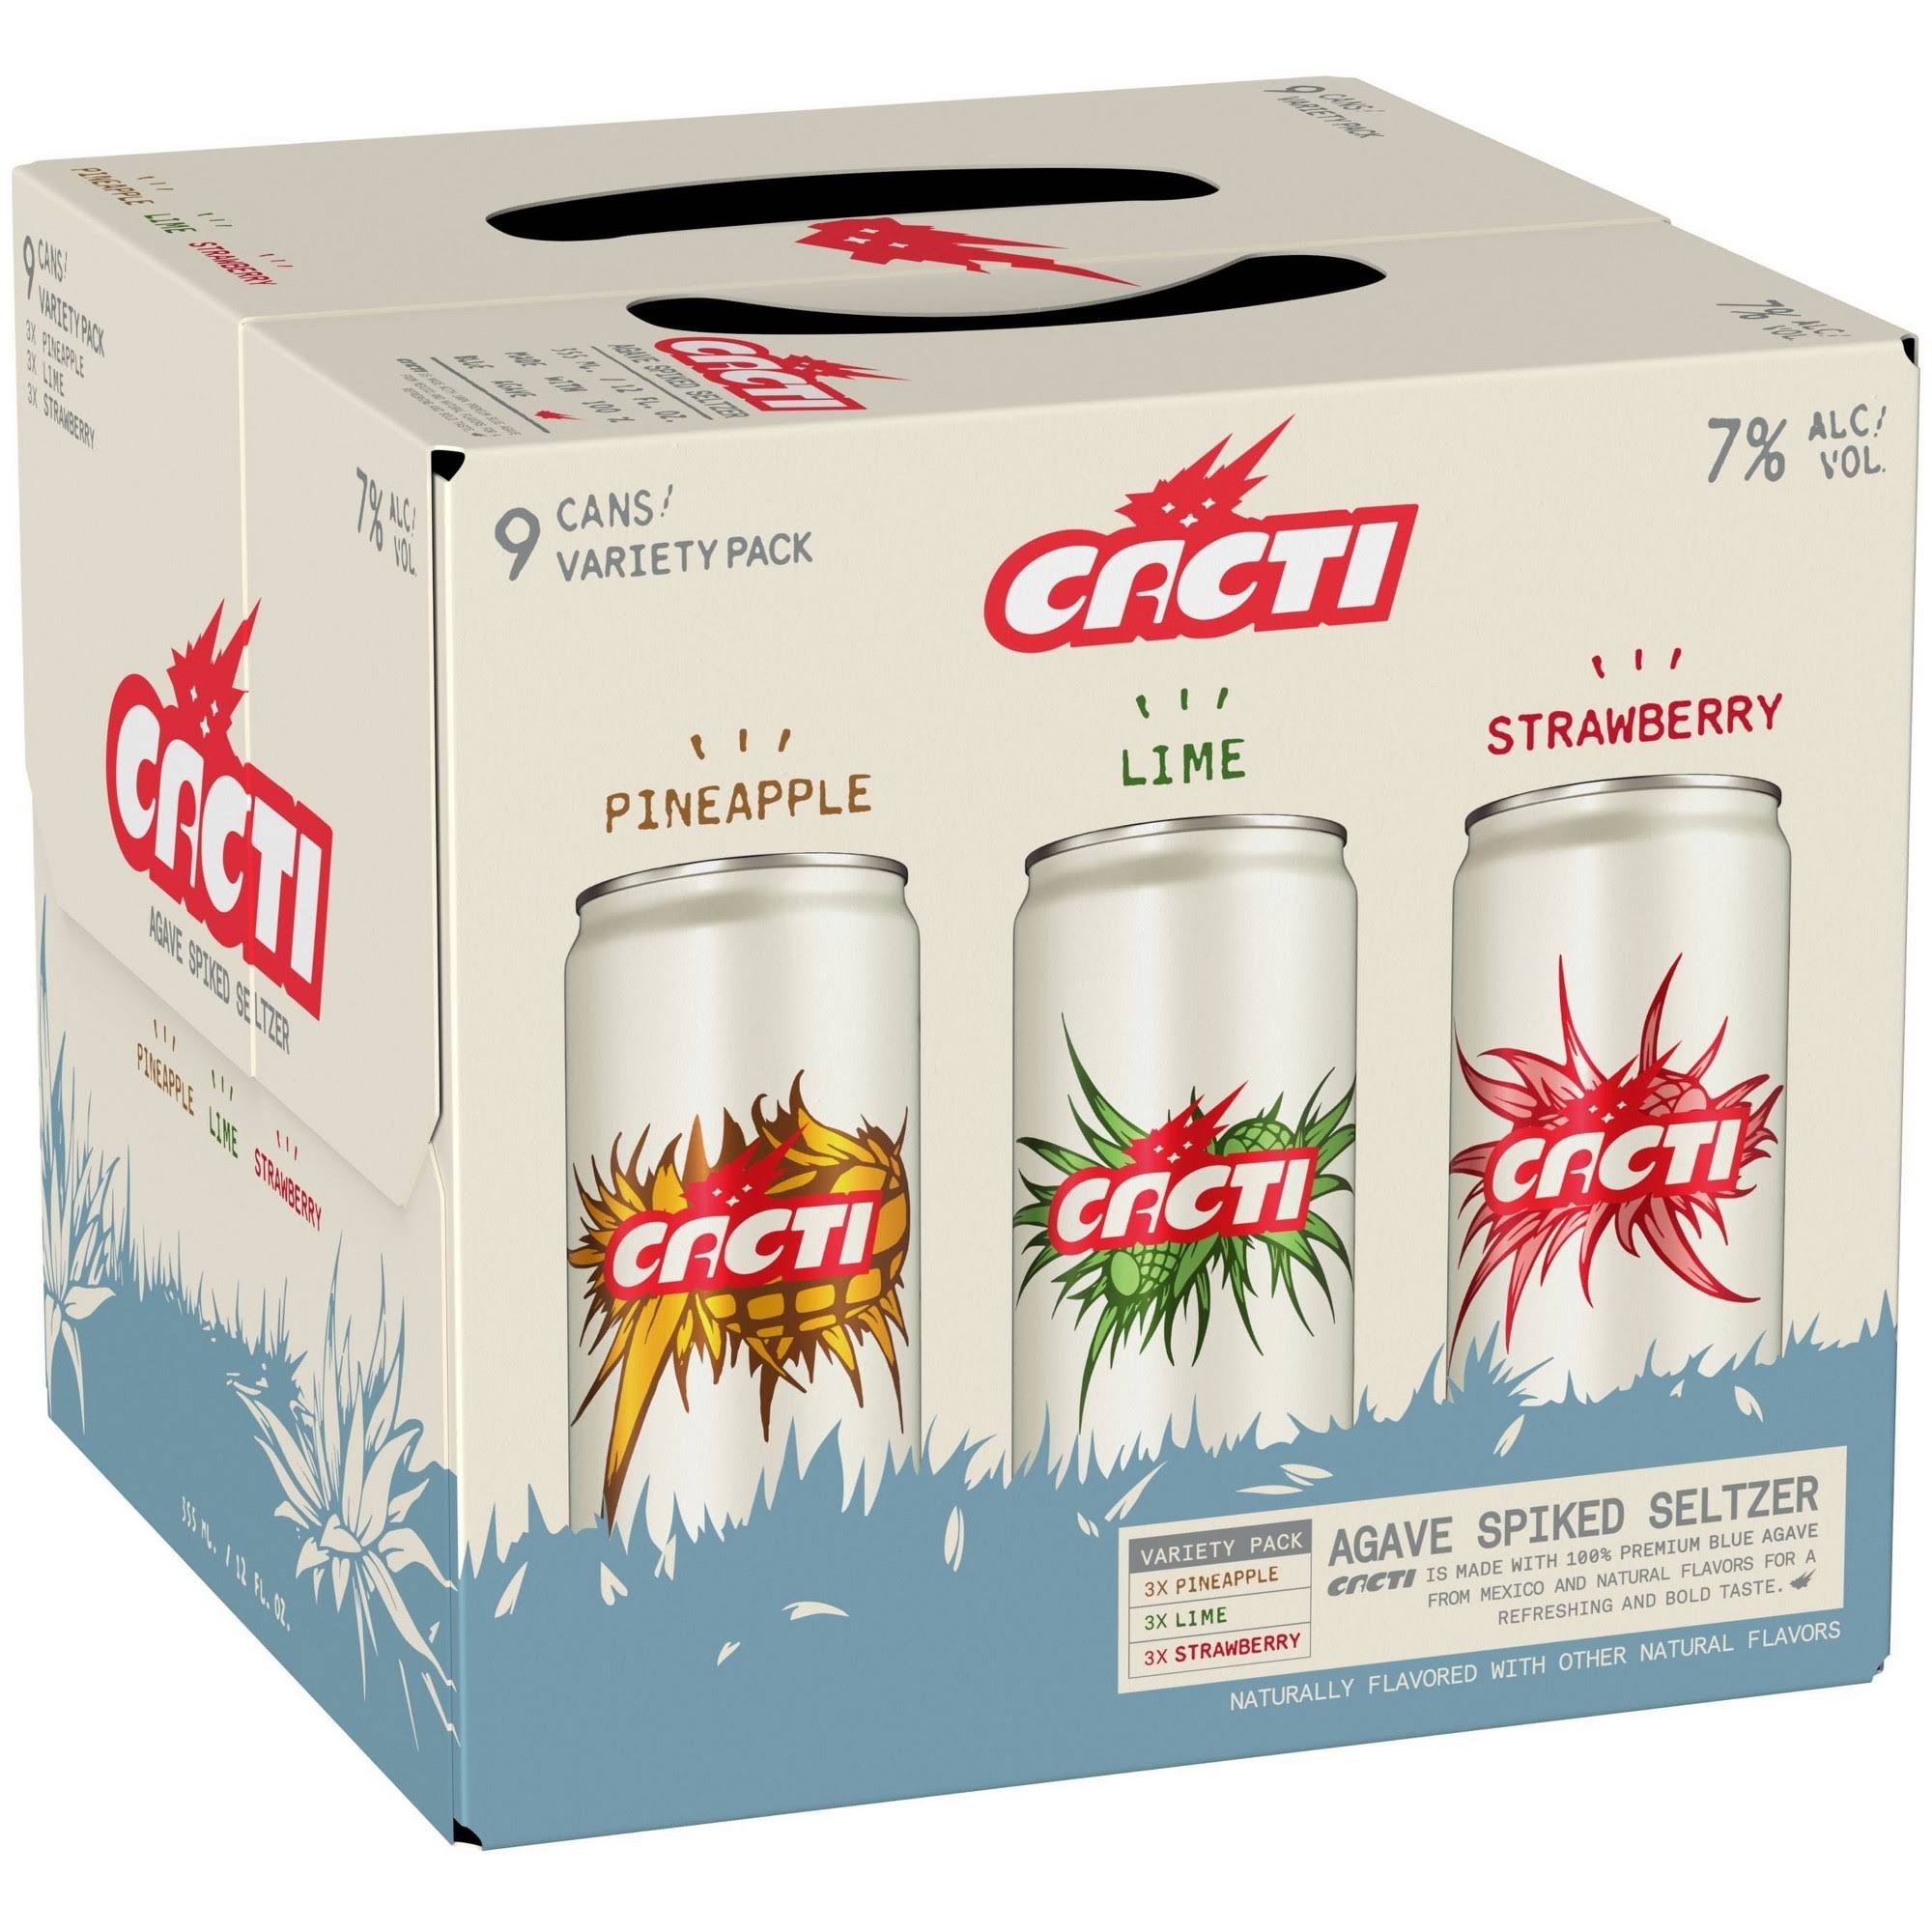 Cacti Spiked Seltzer, Agave, Pineapple/Lime/Strawberry, Variety Pack - 9 pack, 12 fl oz cans